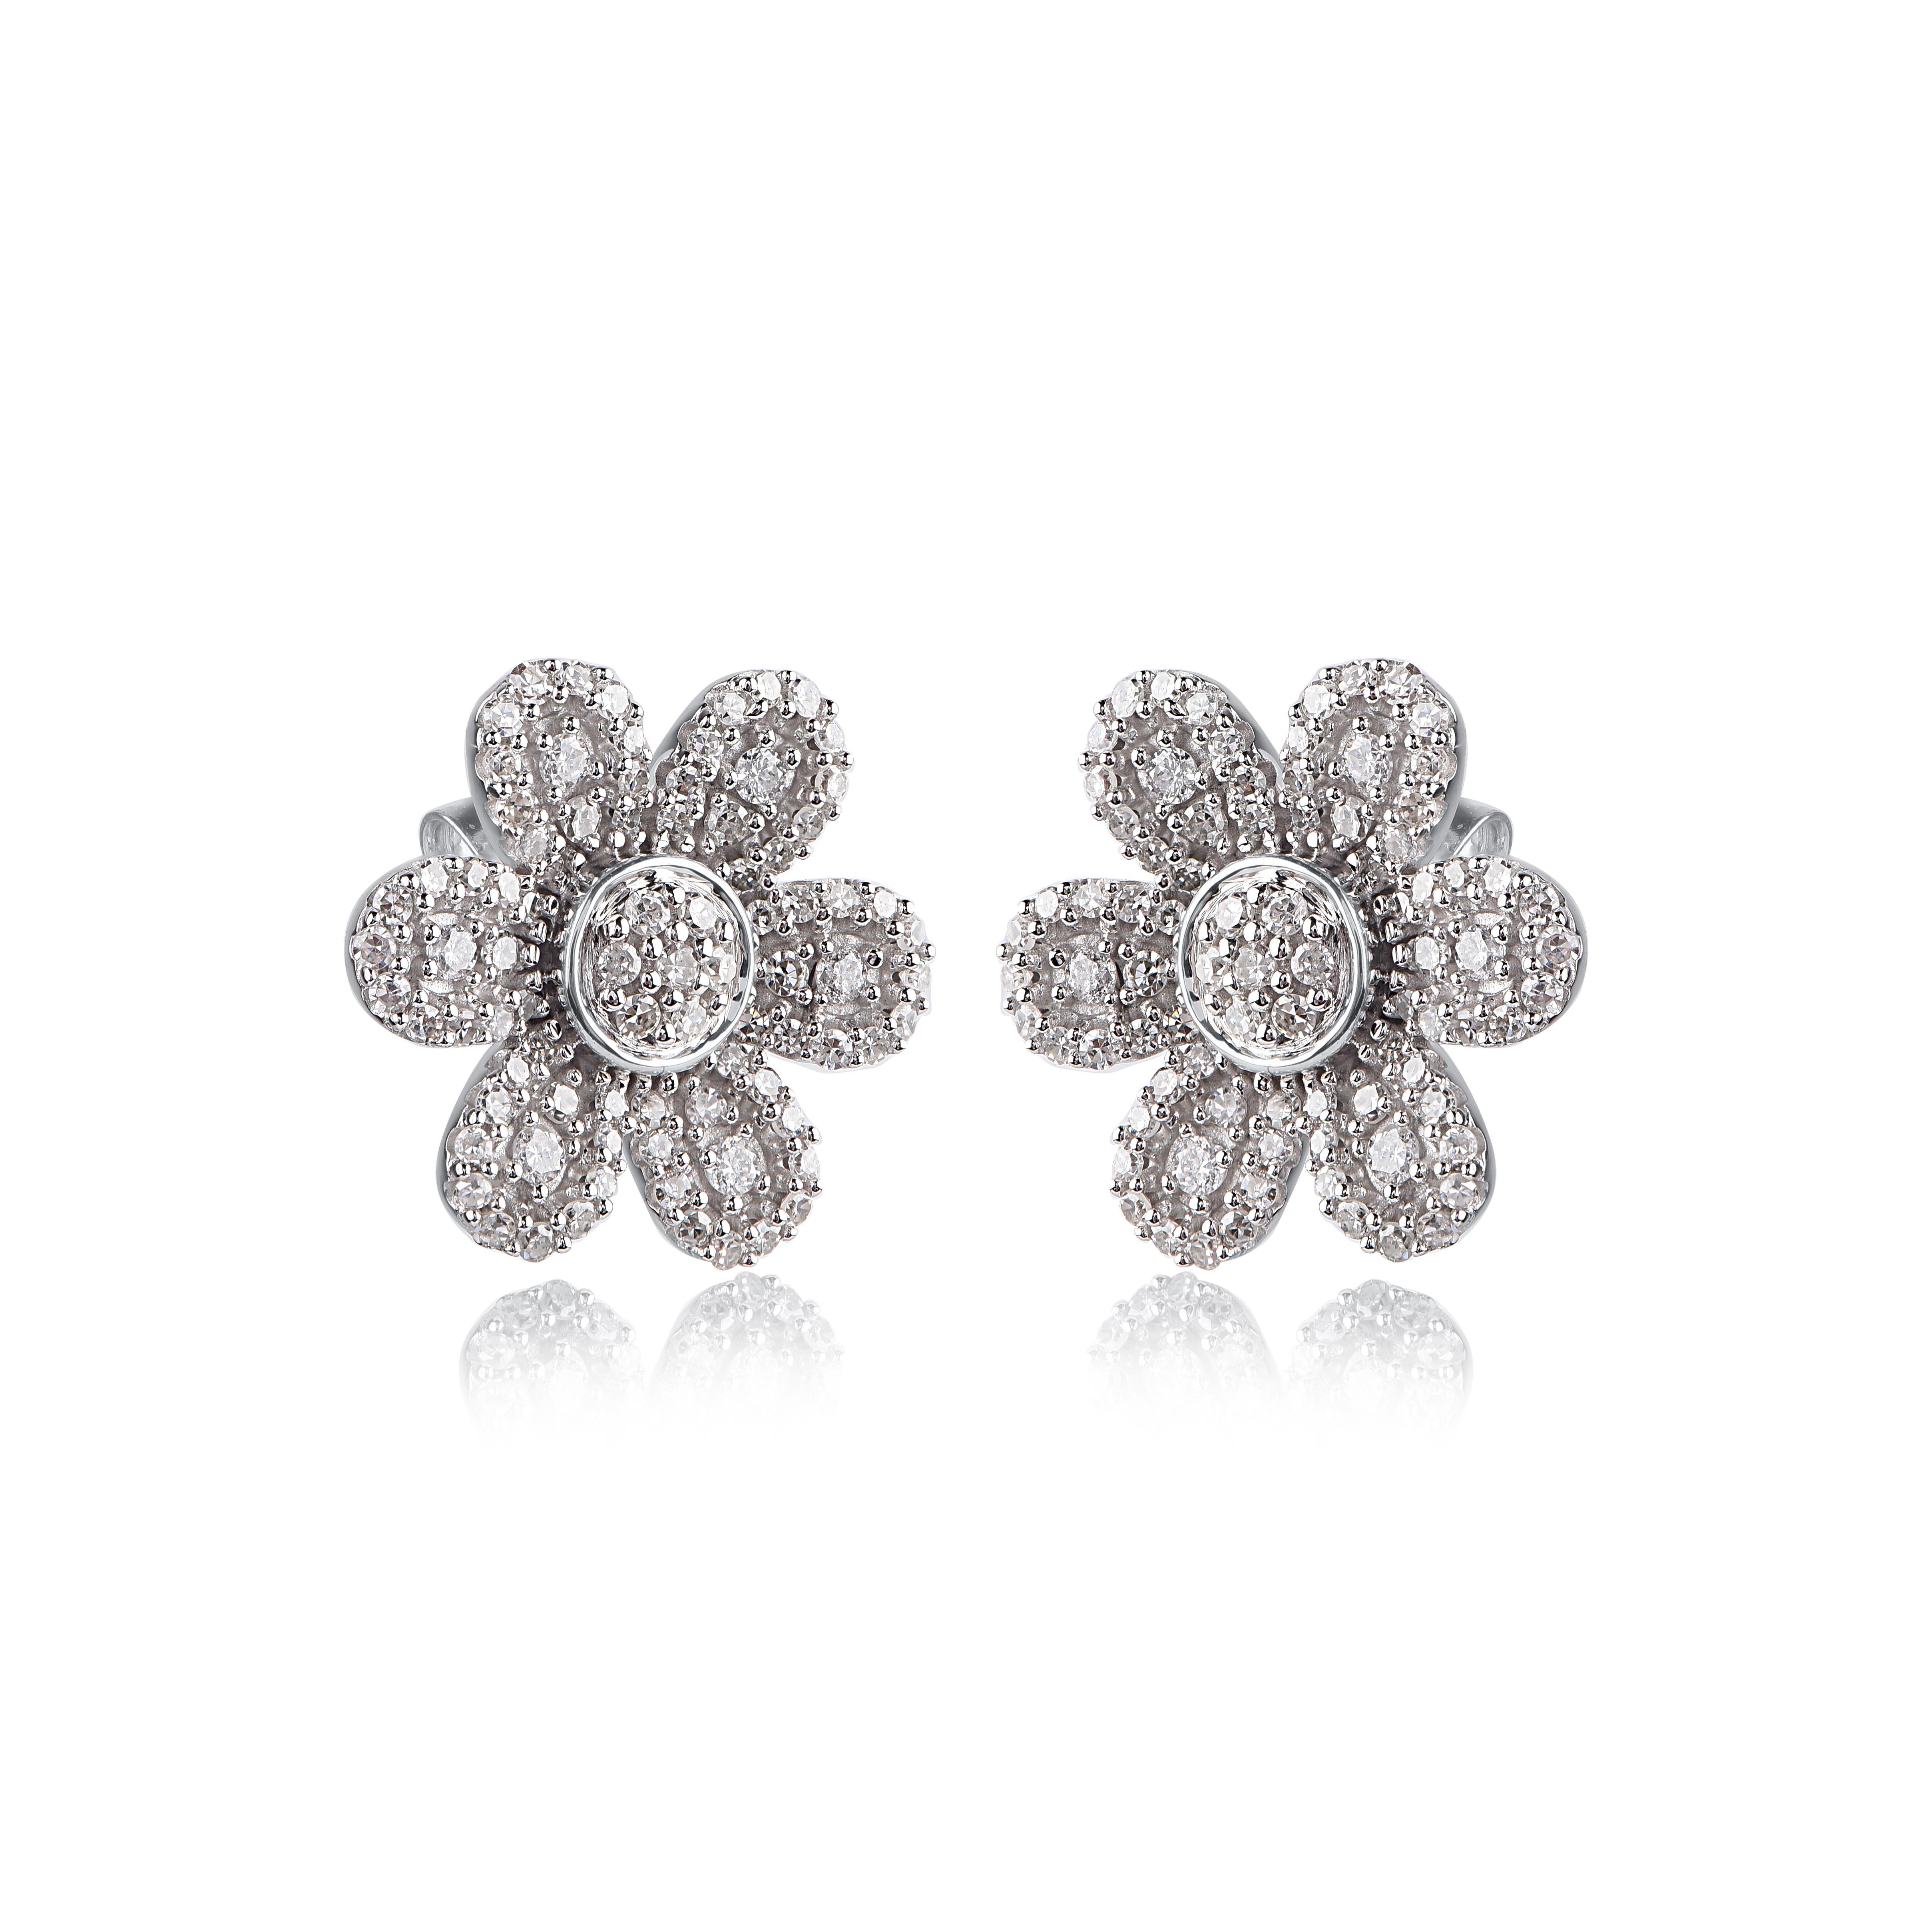 Expertly crafted in 14K solid white gold, each Flower shaped earring is cleverly filled with 170 round diamond set in pave and stackable prong setting, H-I color I2 clarity. Captivating with 0.50 carats diamonds and a bright polished shine, these